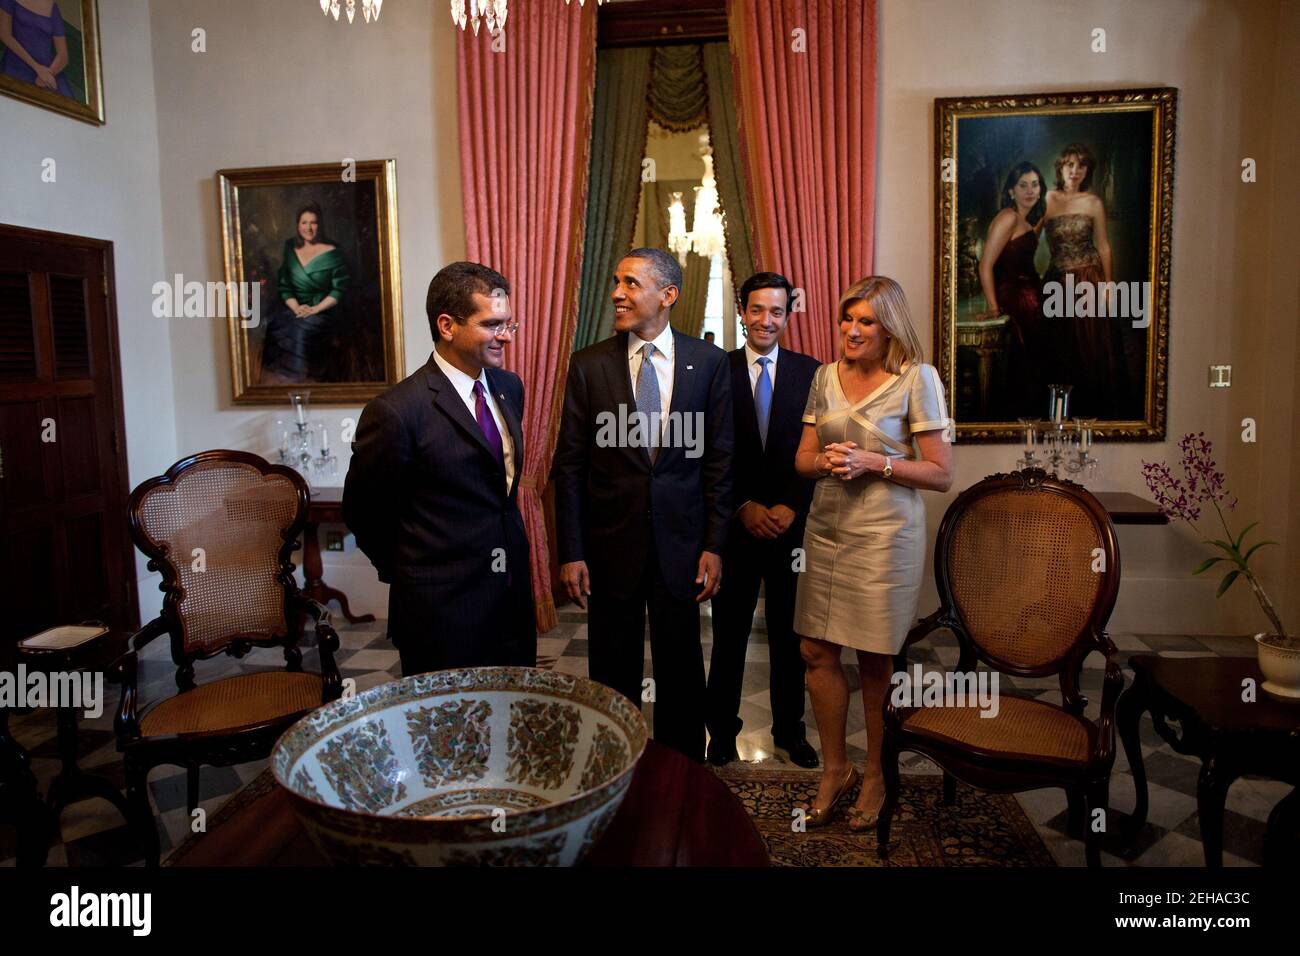 President Barack Obama tours La Fortaleza, the official residence of the Governor of Puerto Rico, with Rep. Pedro Pierluisi, left,  Gov. Luis Fortuño, and First Lady Lucé Vela de Fortuño in San Juan, Puerto Rico, June 14, 2011. Stock Photo